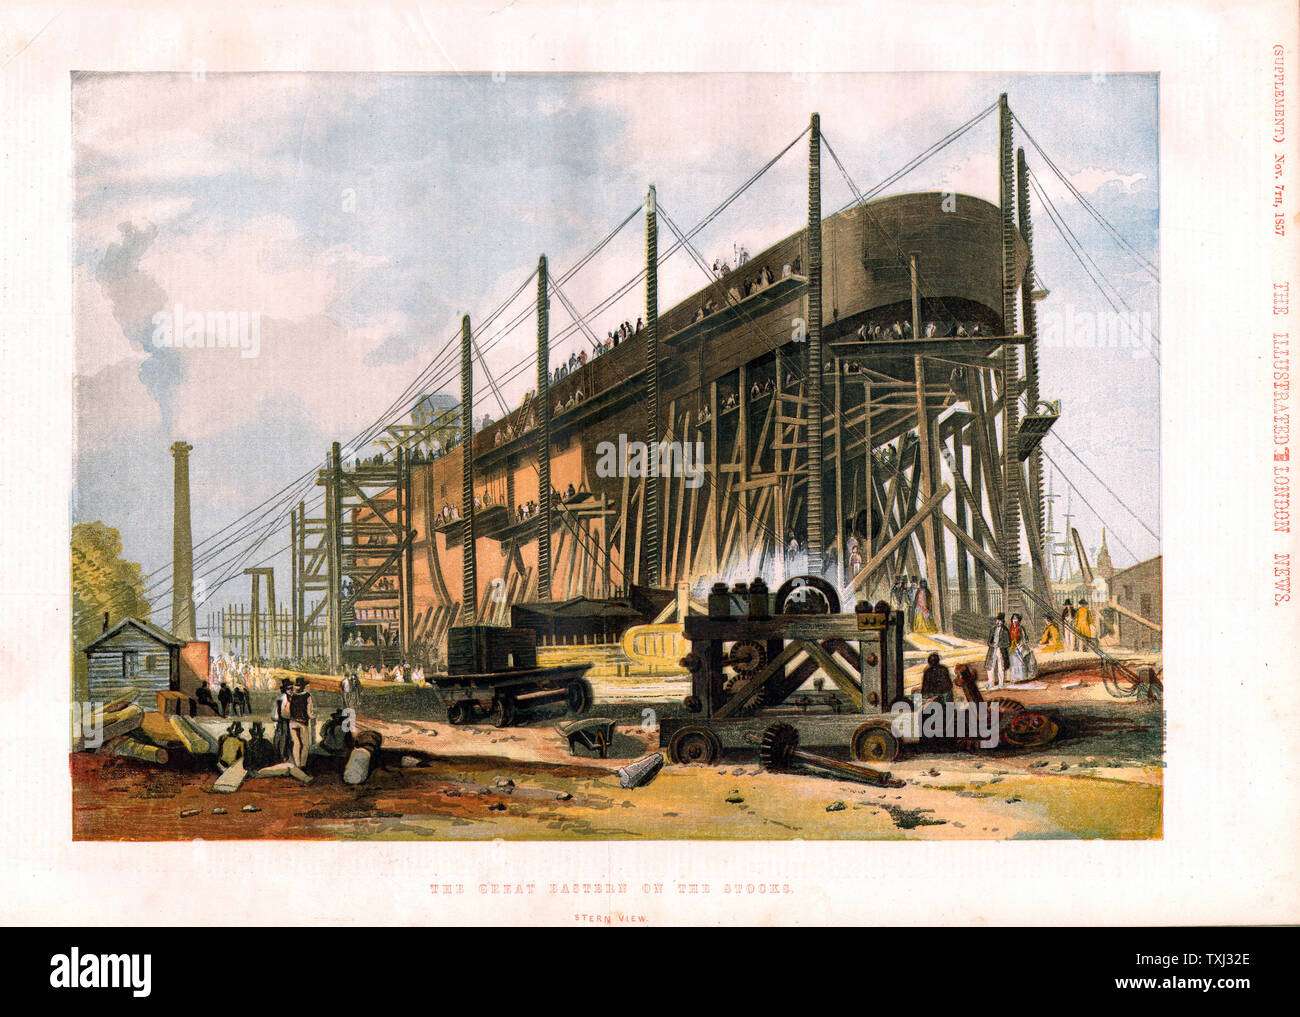 1857 Illustrated London News Supplement illustration of Isambard Kingdom Brunel's ship SS Great Eastern under construction at Millwall, London Stock Photo